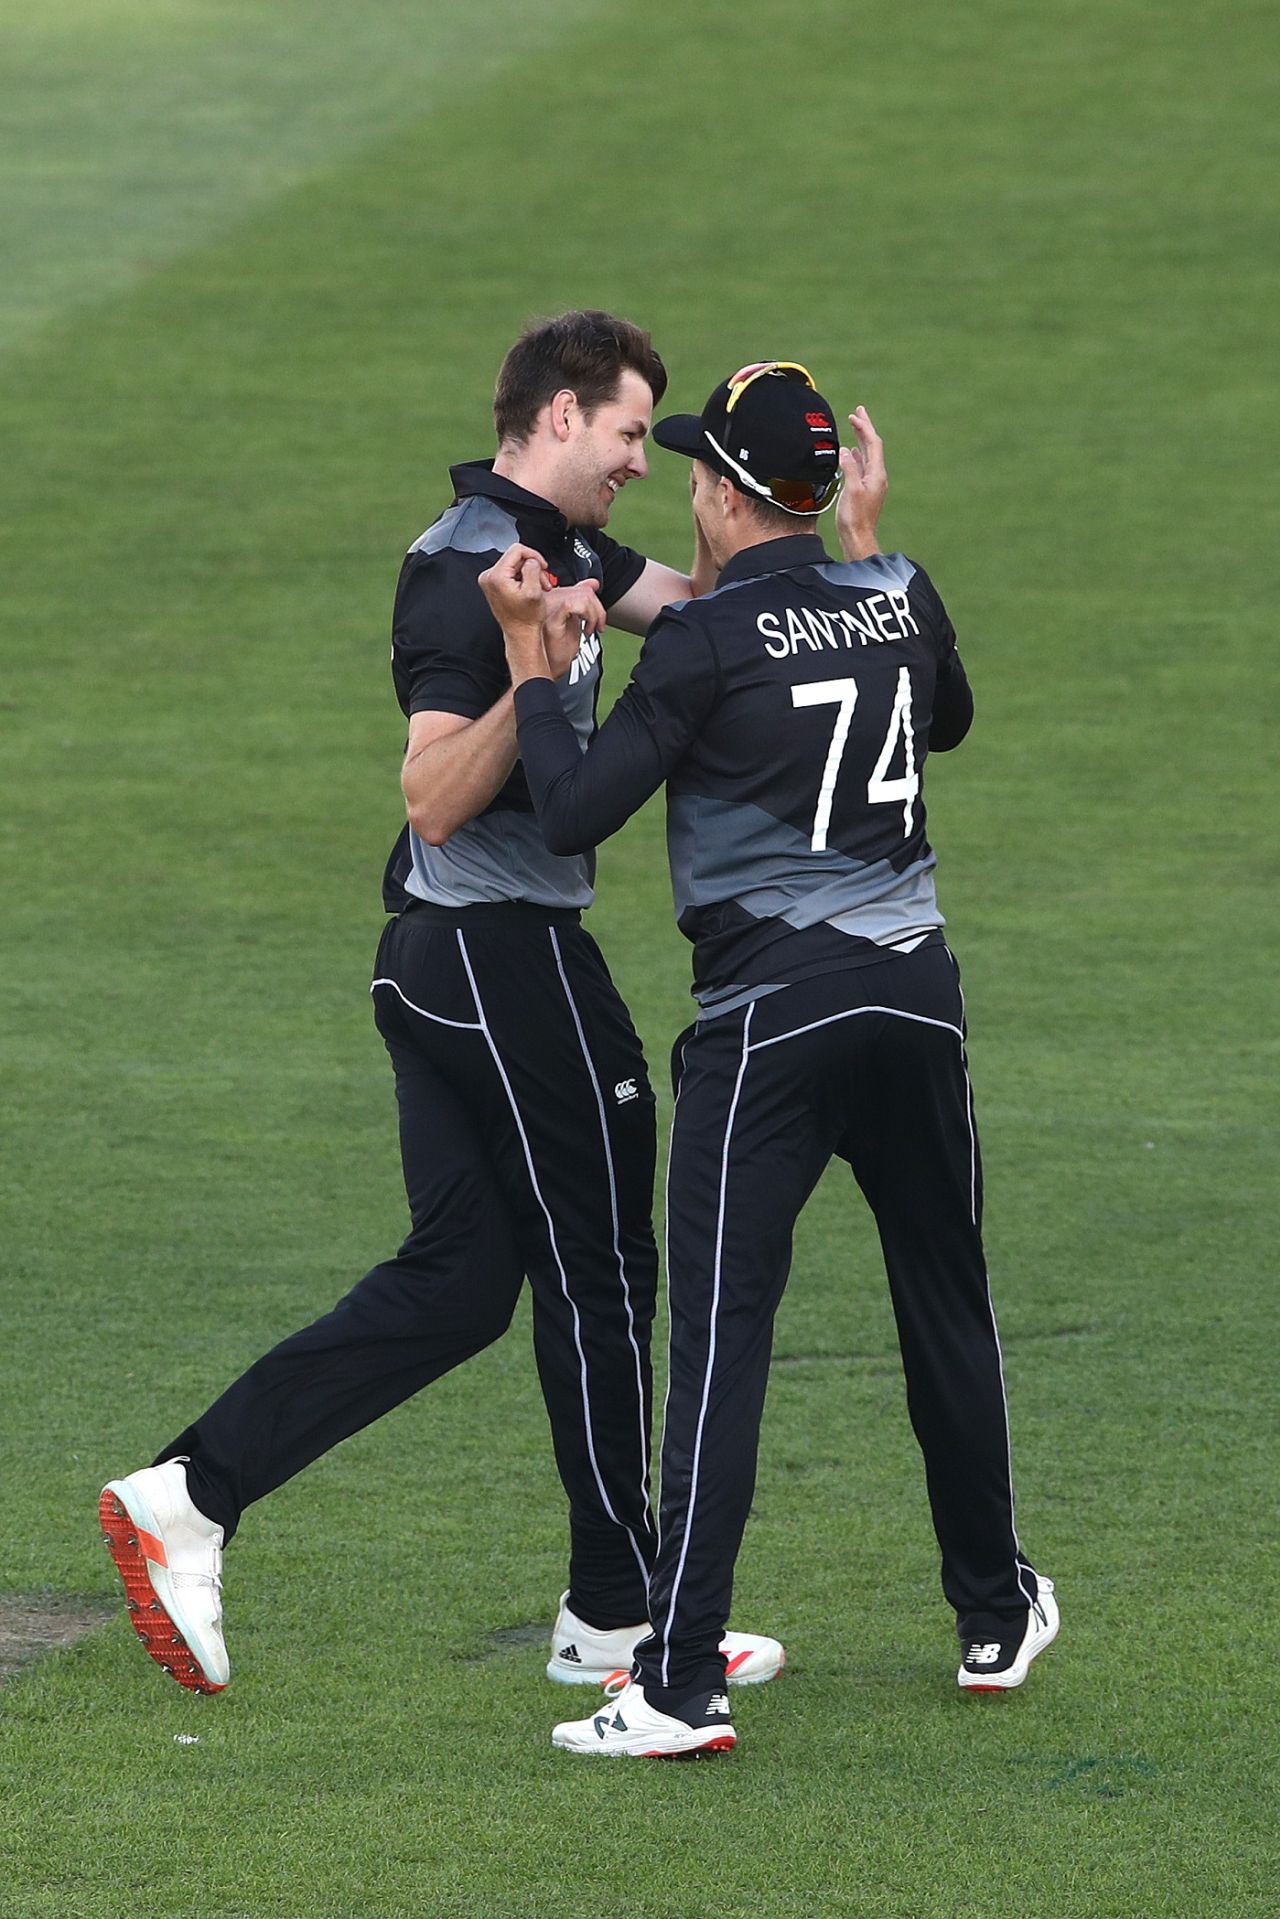 Jacob Duffy celebrates a wicket with his captain Mitchell Santner, New Zealand vs Pakistan, 1st T20I, Auckland, December 18, 2020